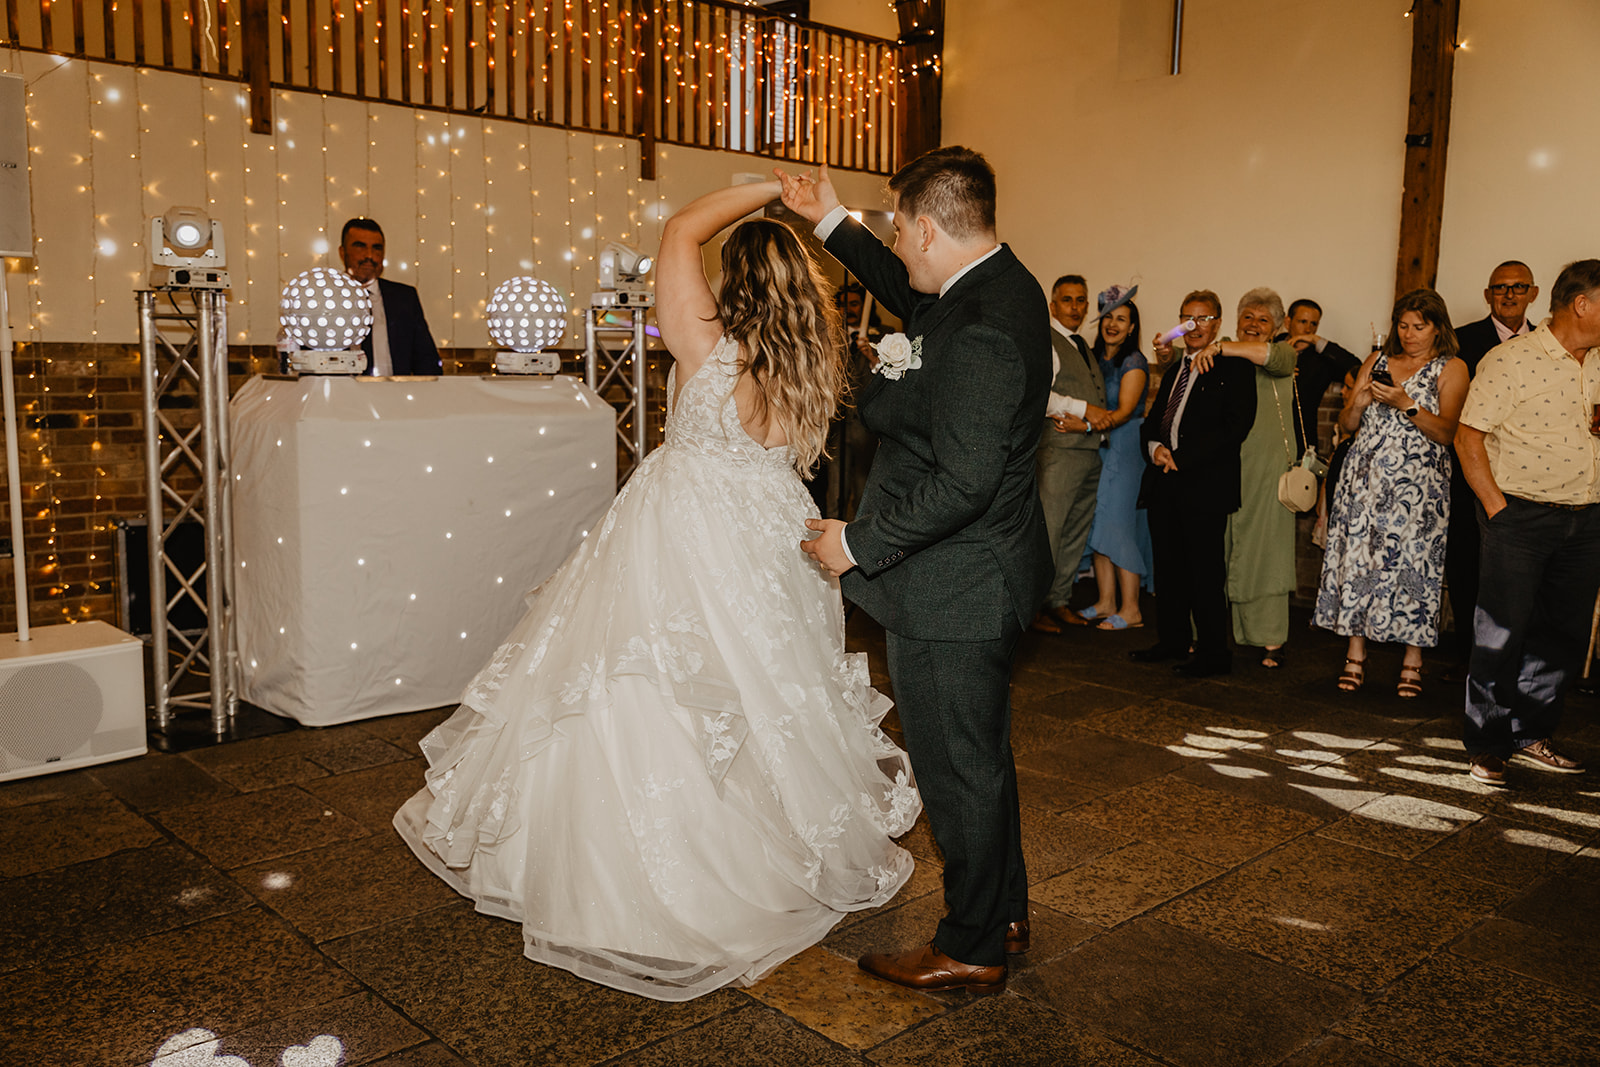 Bride and Groom have first dance at a Long Furlong Barn Wedding in Worthing, Sussex. By Olive Joy Photography.